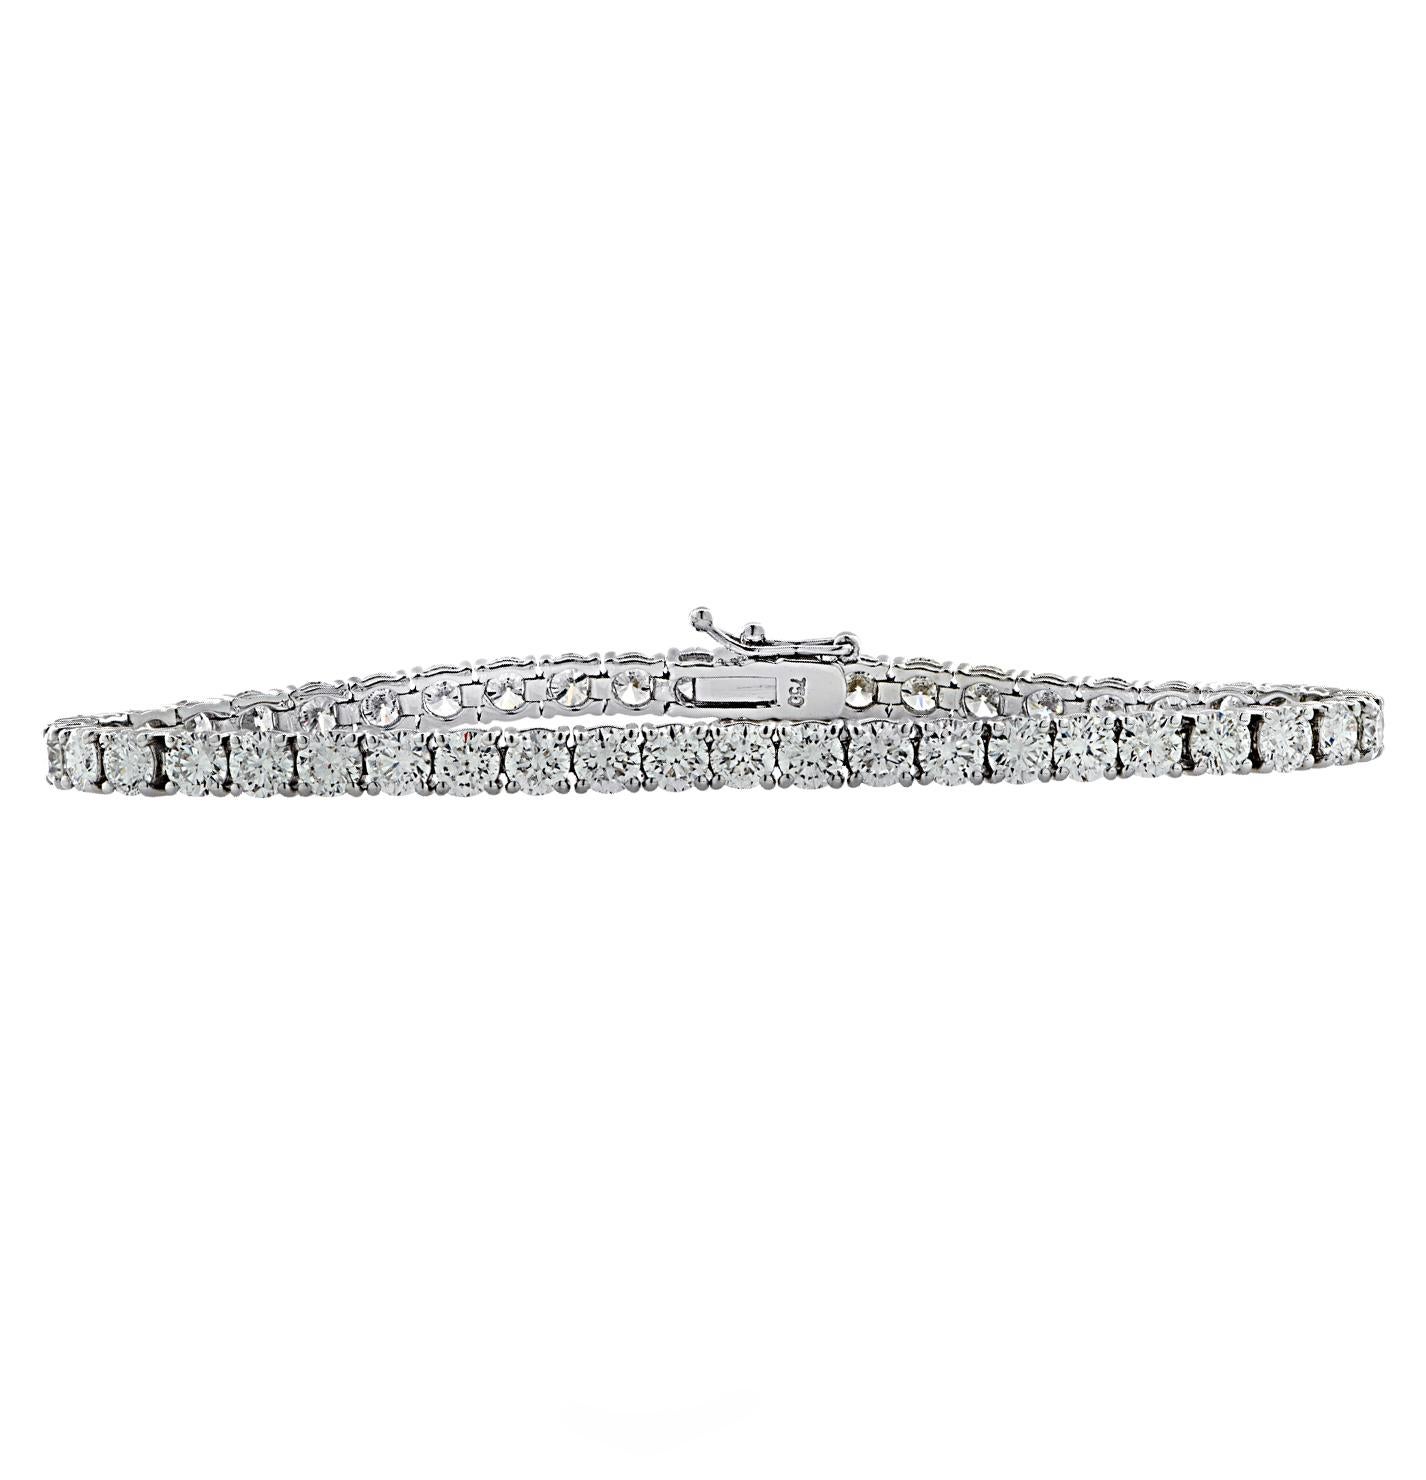 Exquisite Vivid Diamonds diamond tennis bracelet crafted in 18 karat white gold, showcasing 45 stunning round brilliant cut diamonds weighing approximately 9.39 carats total, D-E color, VS-SI clarity. Each diamond is carefully selected, perfectly